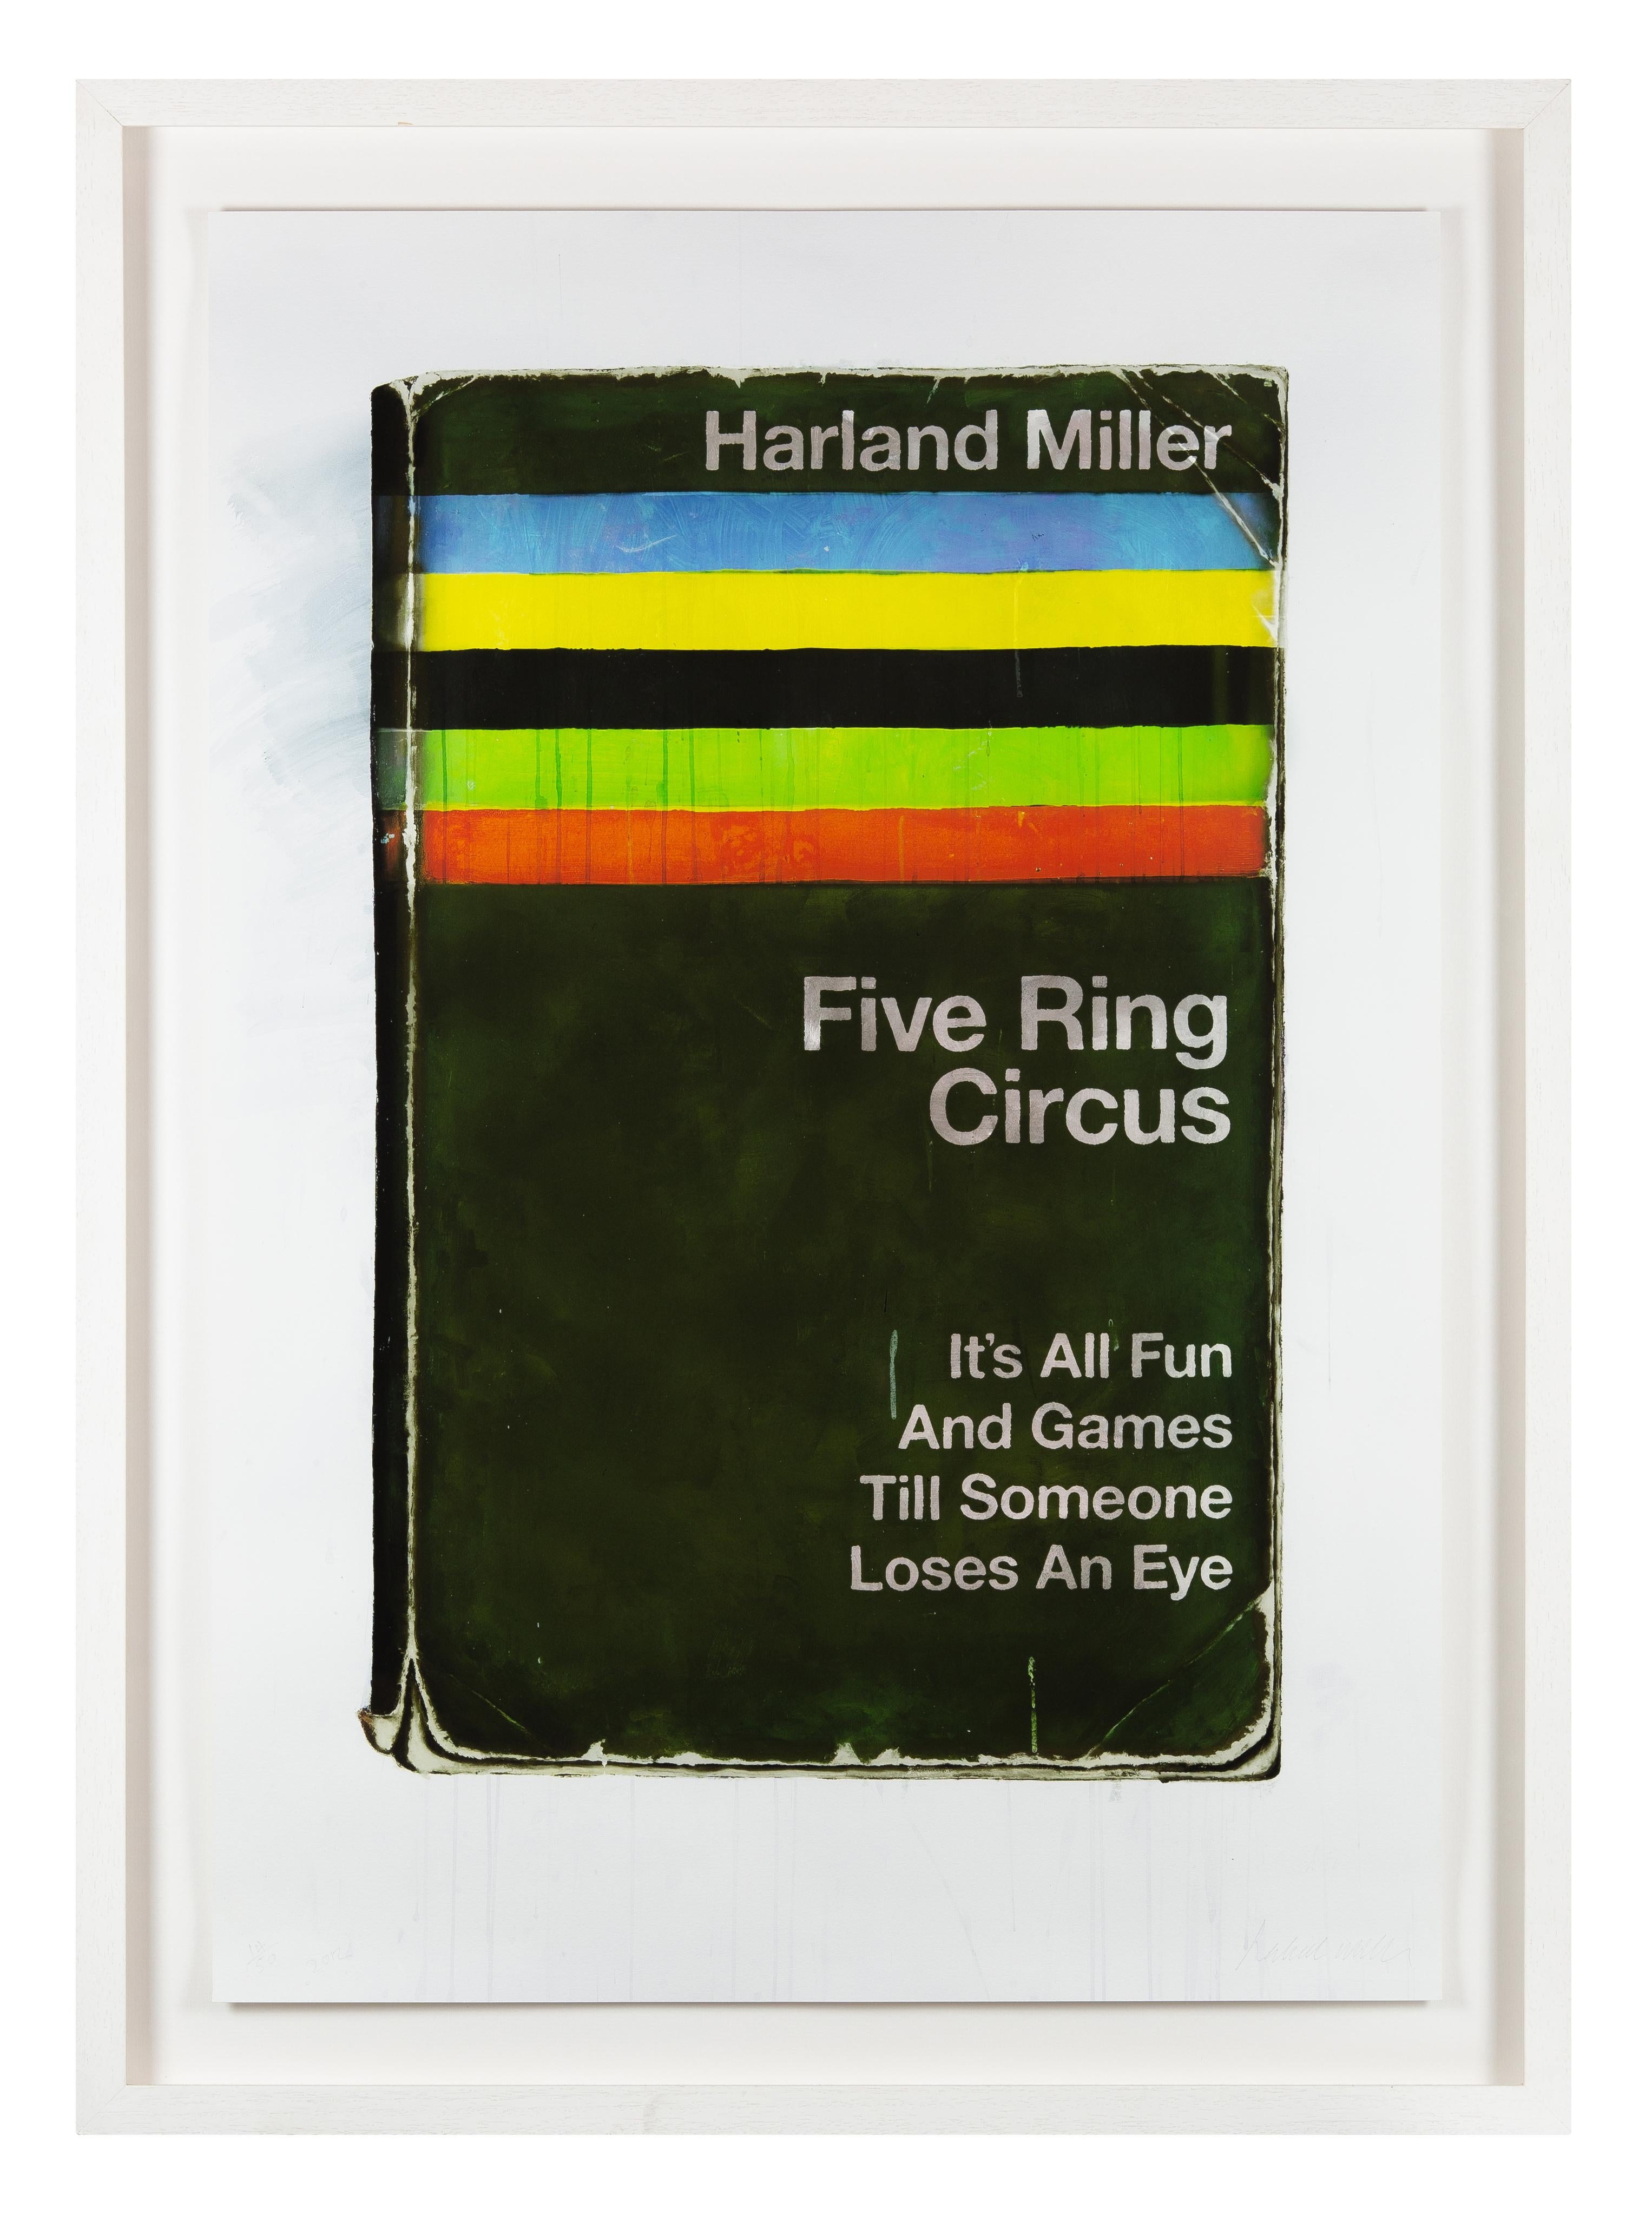 Five Ring Circus-It's All Fun and Games Till Someone Loses an Eye - Contemporary Print by Harland Miller